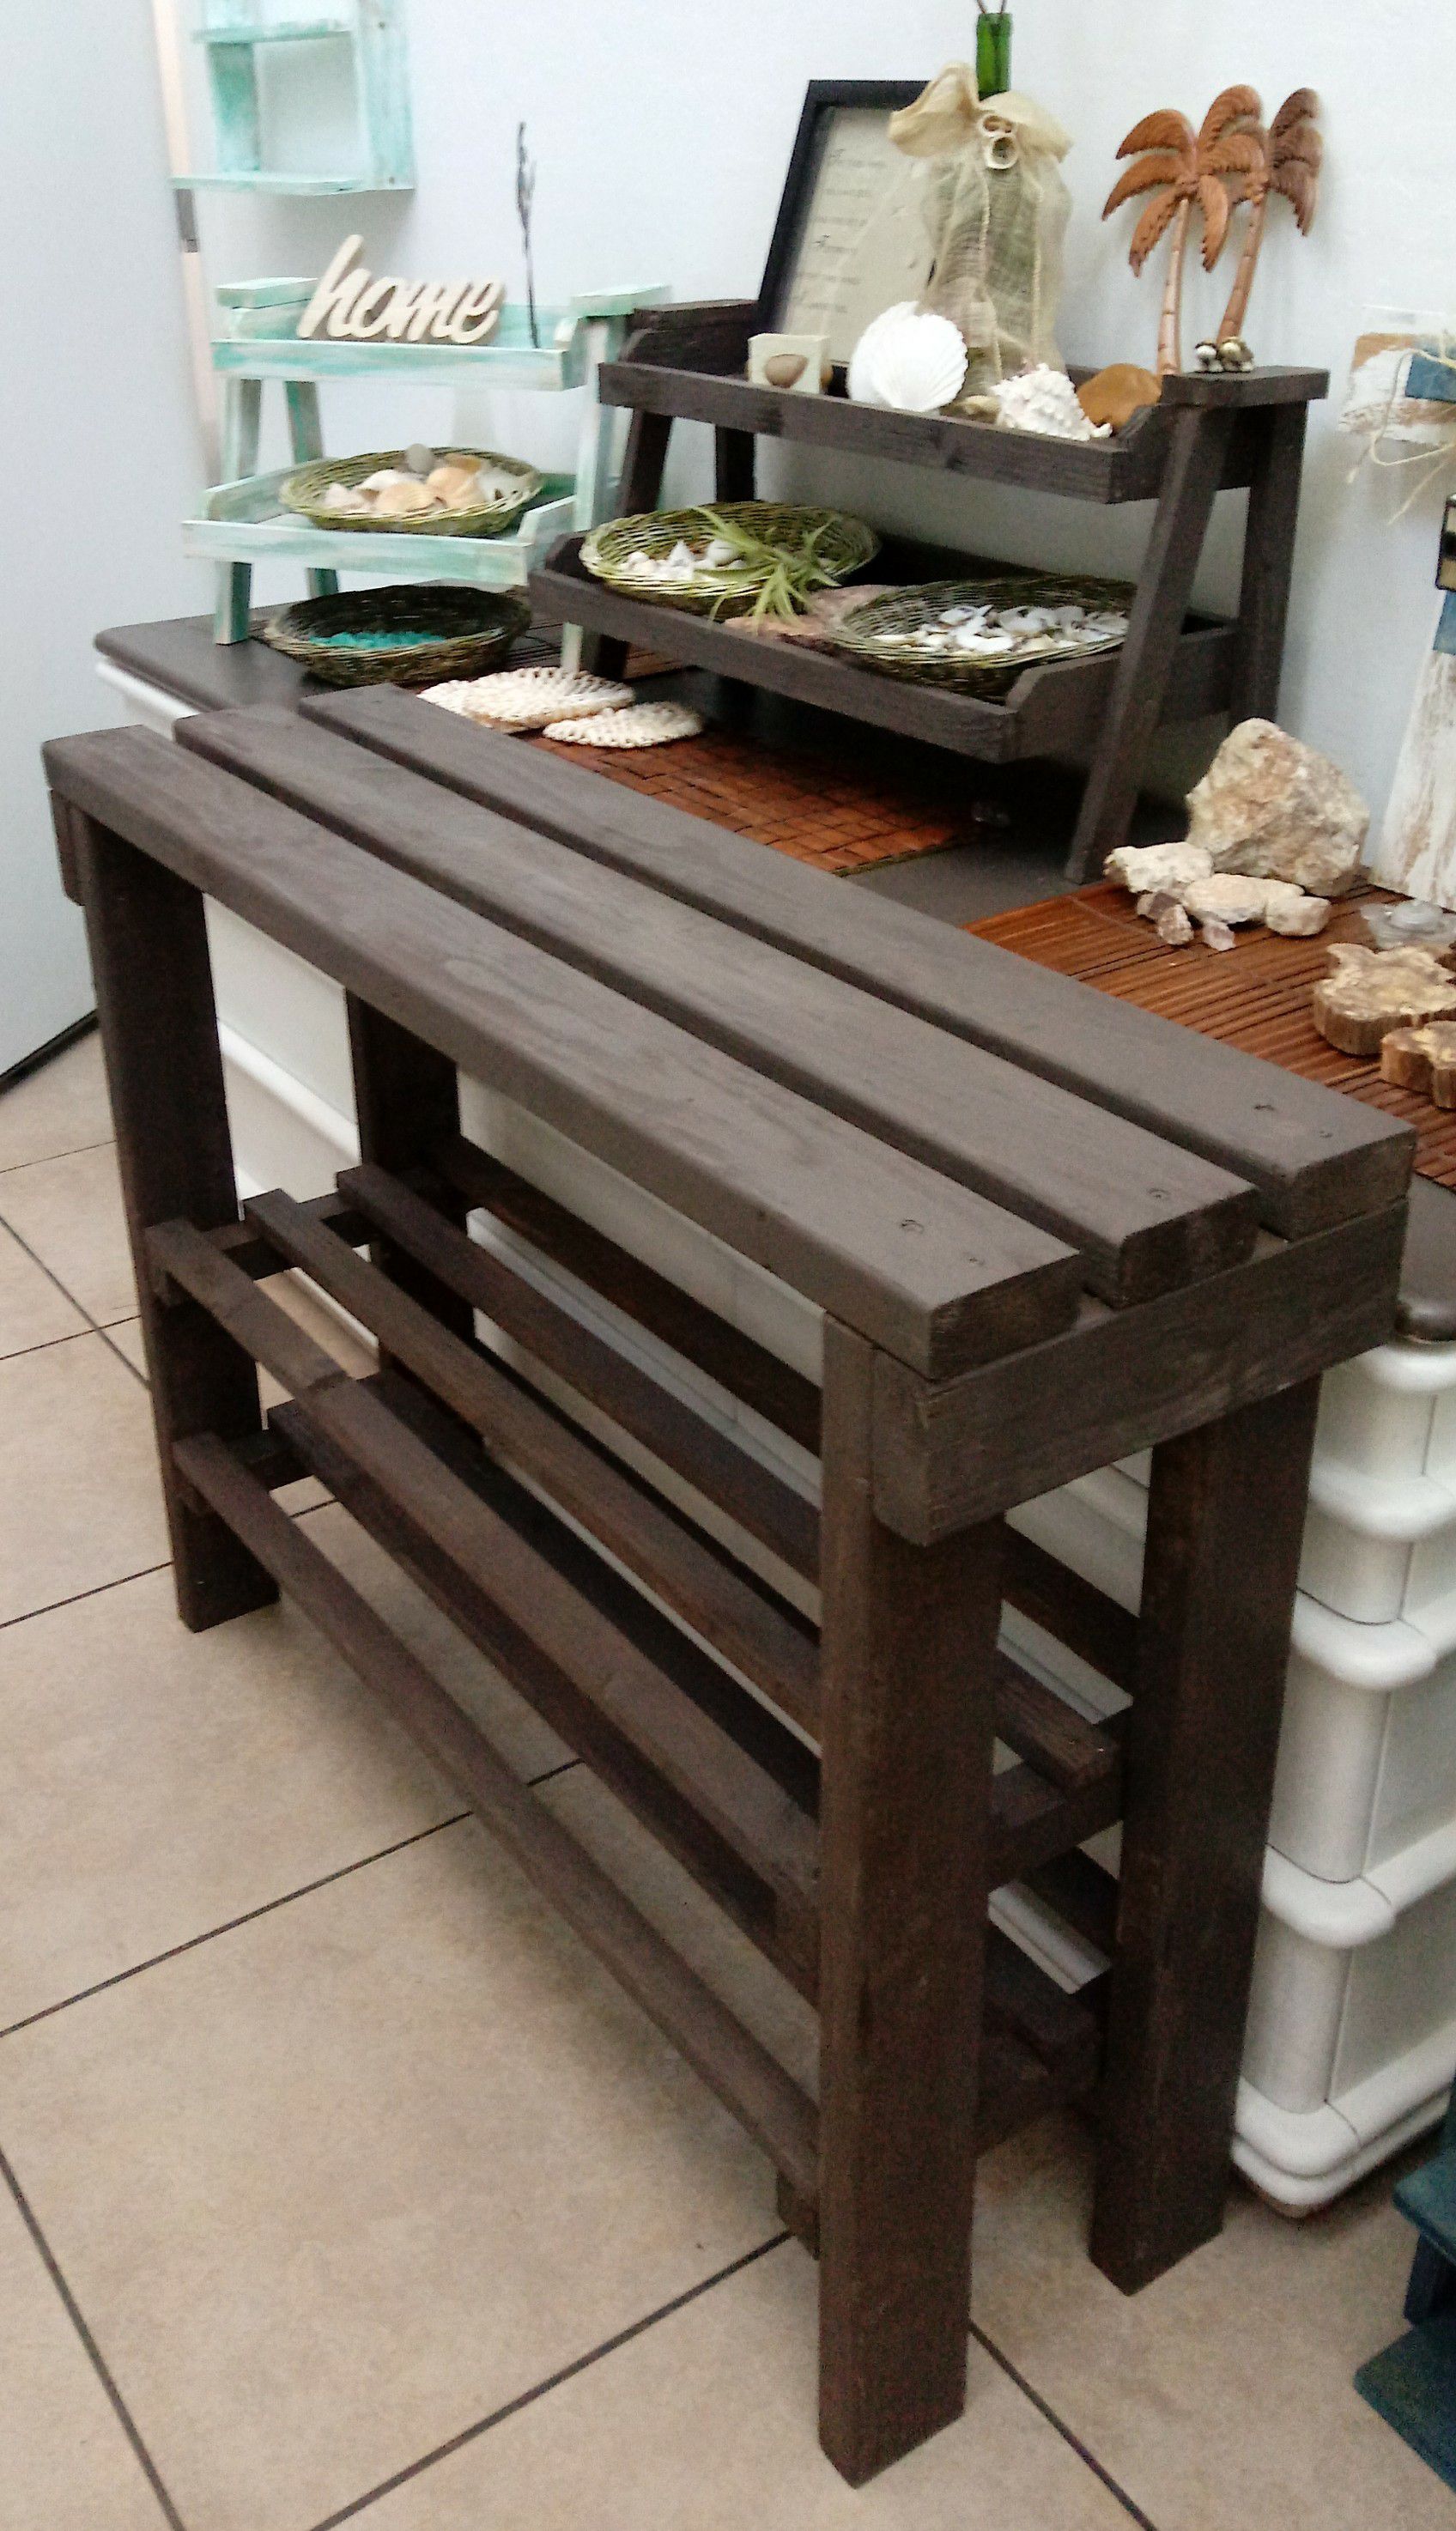 30"H X 40"W X 12"D (3 Planks) 🌱Solid Wood Entryway Console/a Coffee Buffet Table with 2 Shelves ::: Rustic Havana Coffee